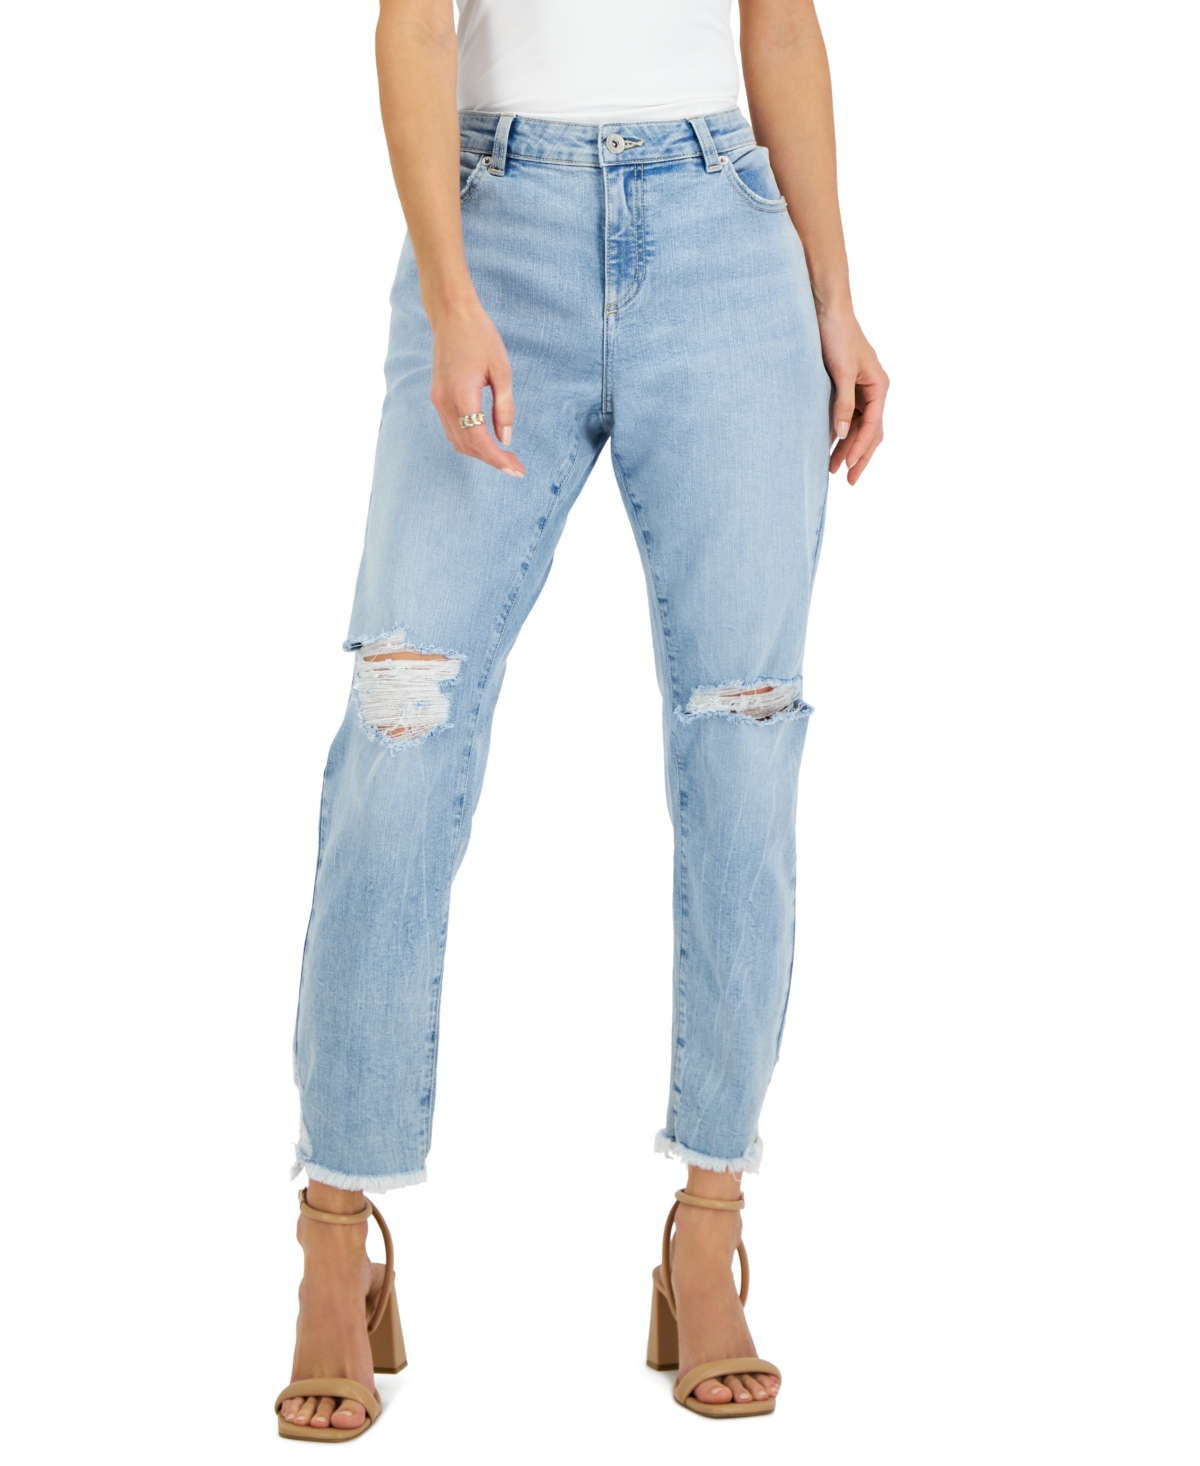  Inc International Concepts Women's Mid-Rise Ripped Straight-Leg Jeans, Created for Macy's